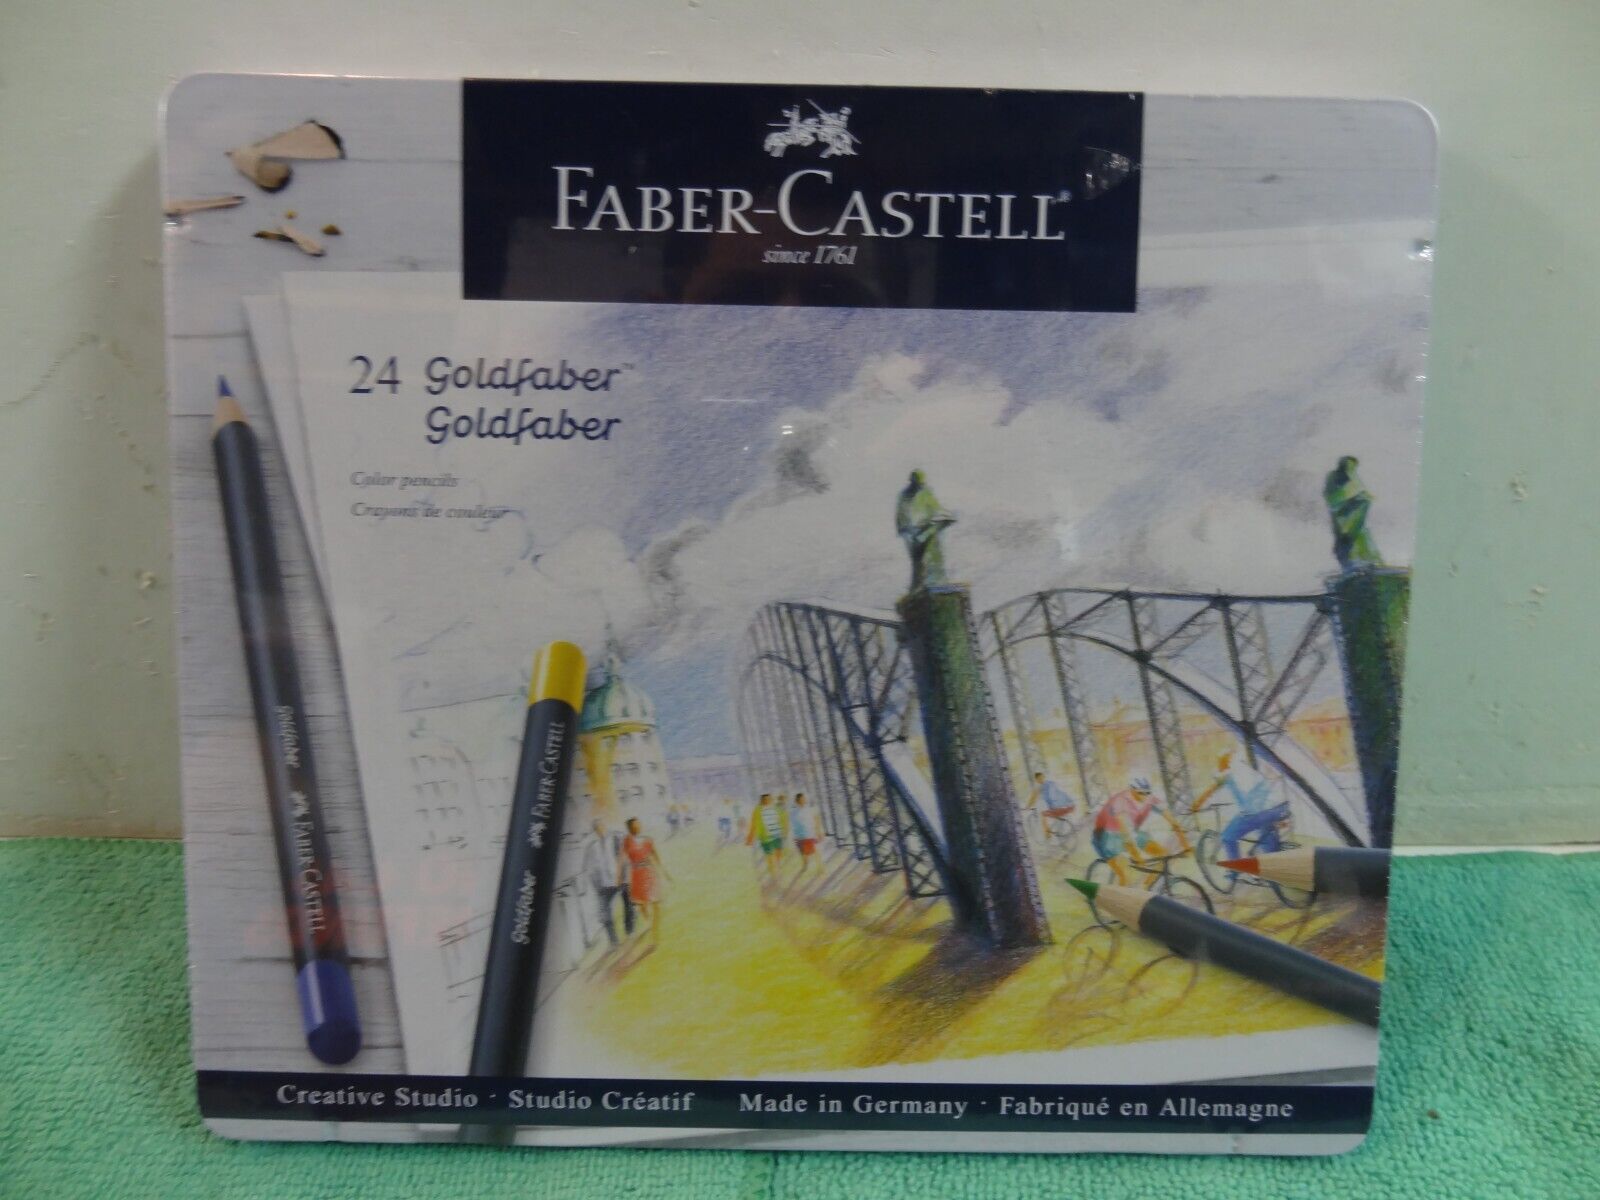 NEW Faber-Castell 24 Goldfaber Colored Pencil Set - Free Shipping